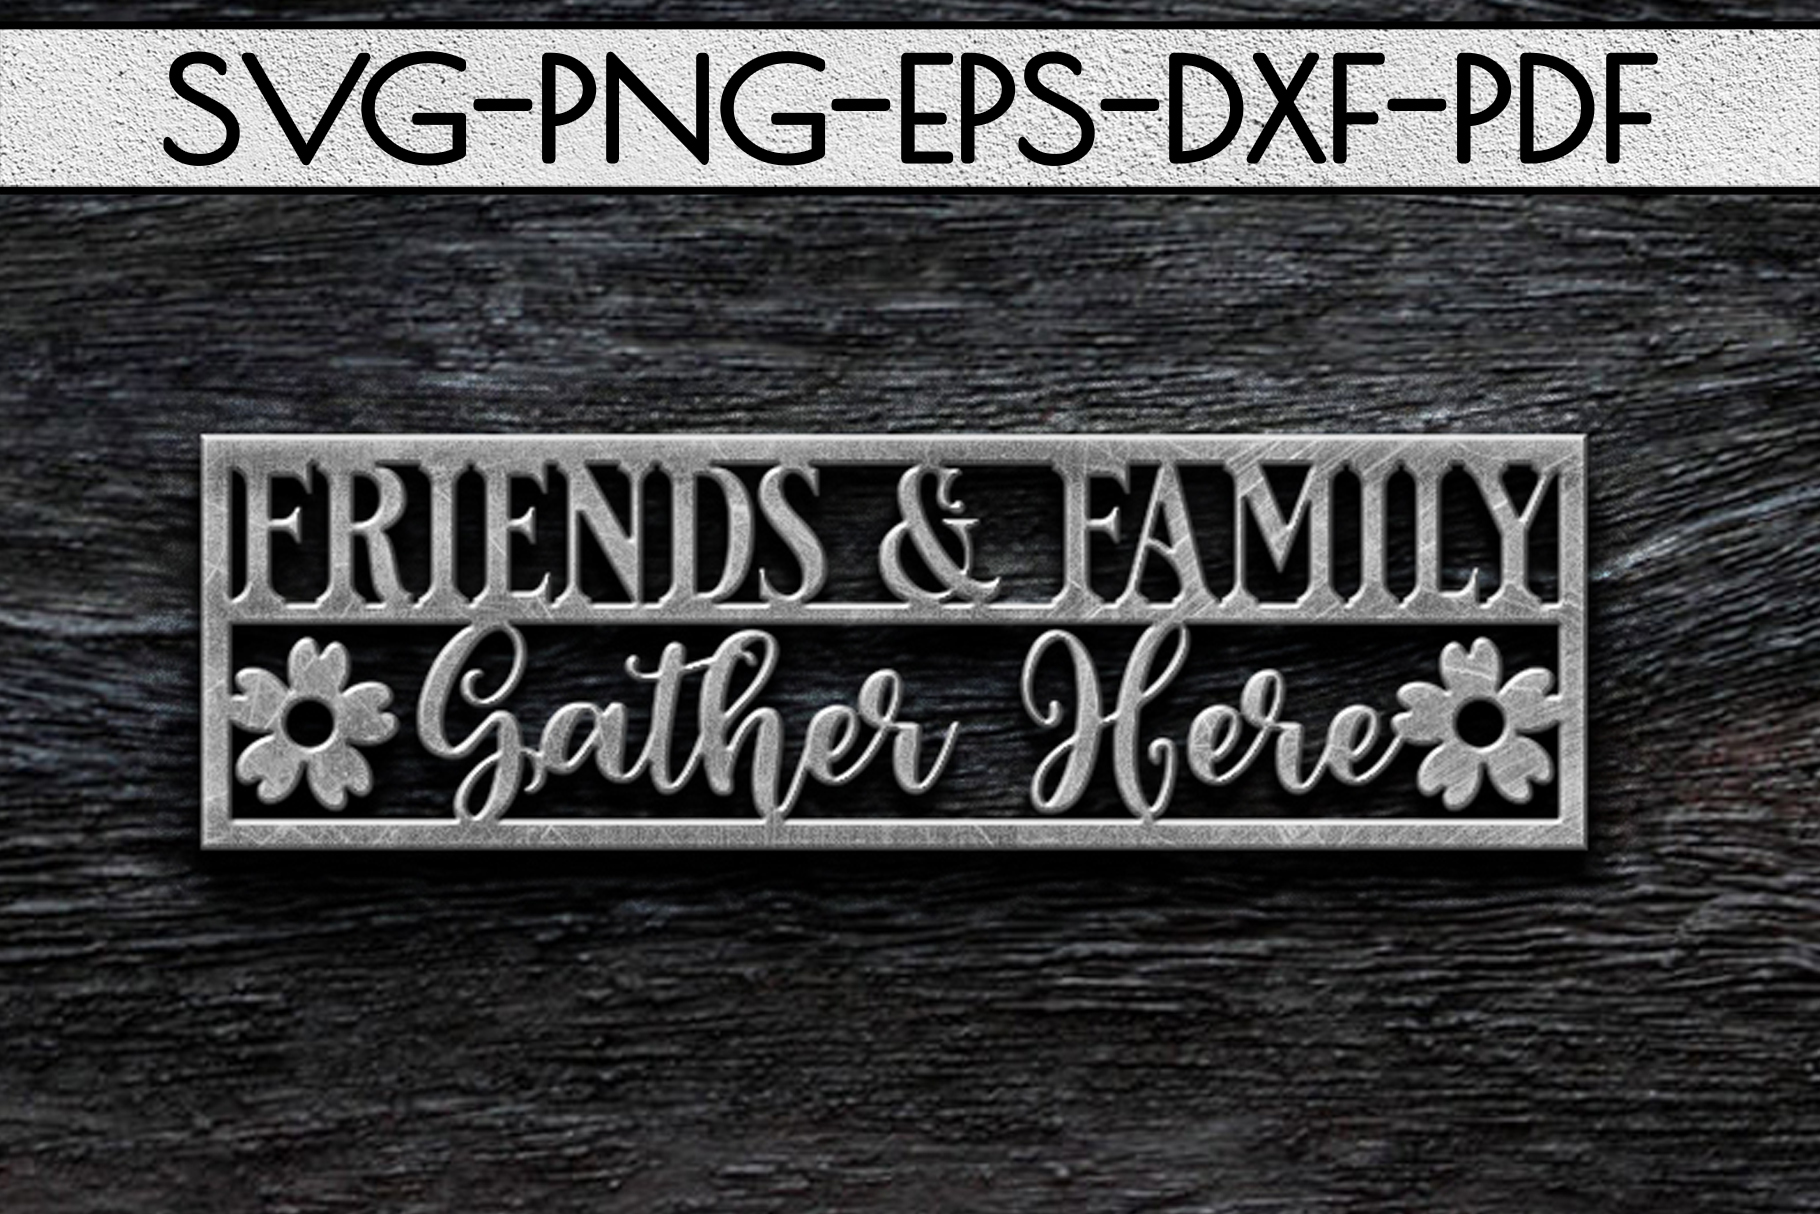 Download Friends & Family Gather Paper cut Template, Home SVG, PDF ...